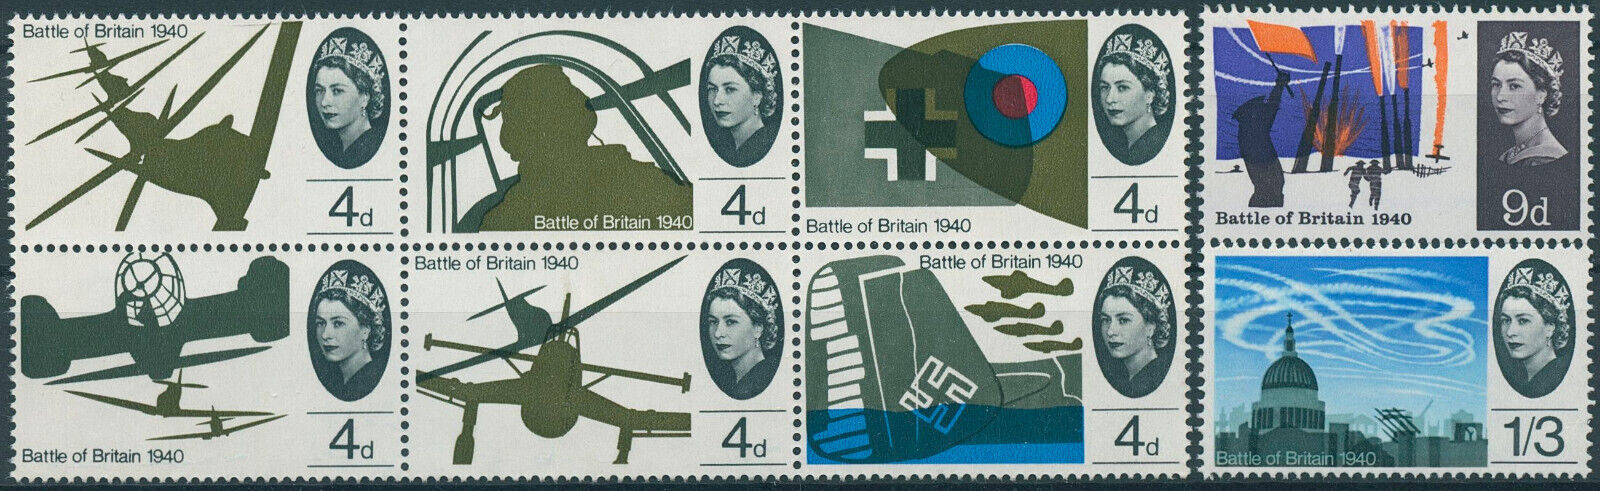 GB 1965 MNH Military Stamps WWII WW2 Battle of Britain 1940 2v Set + 6v Block